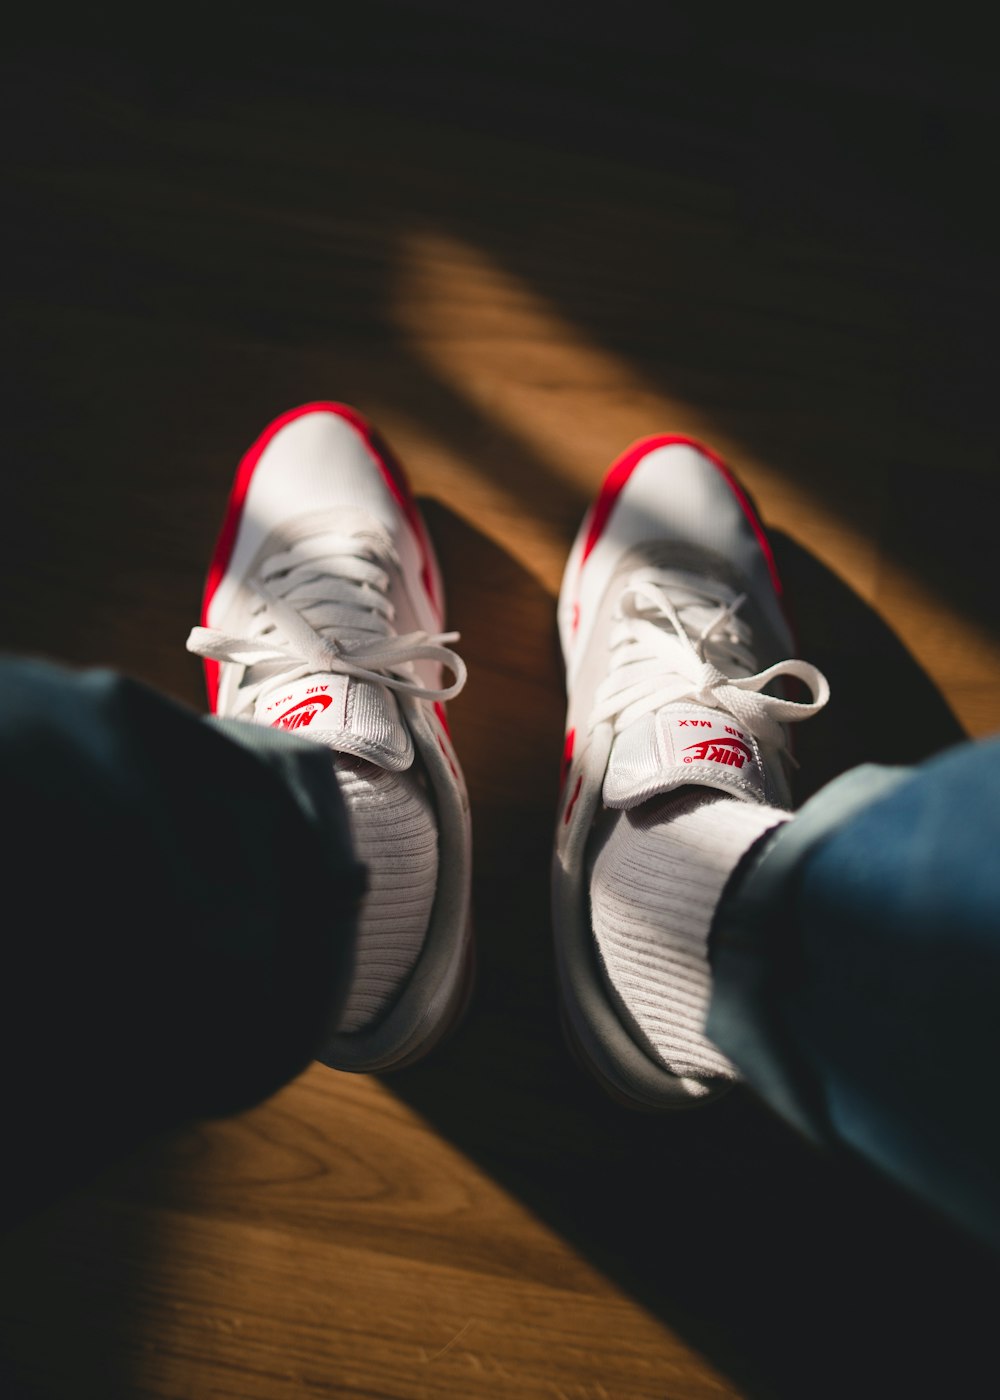 person holding white-and-red Nike running shoes